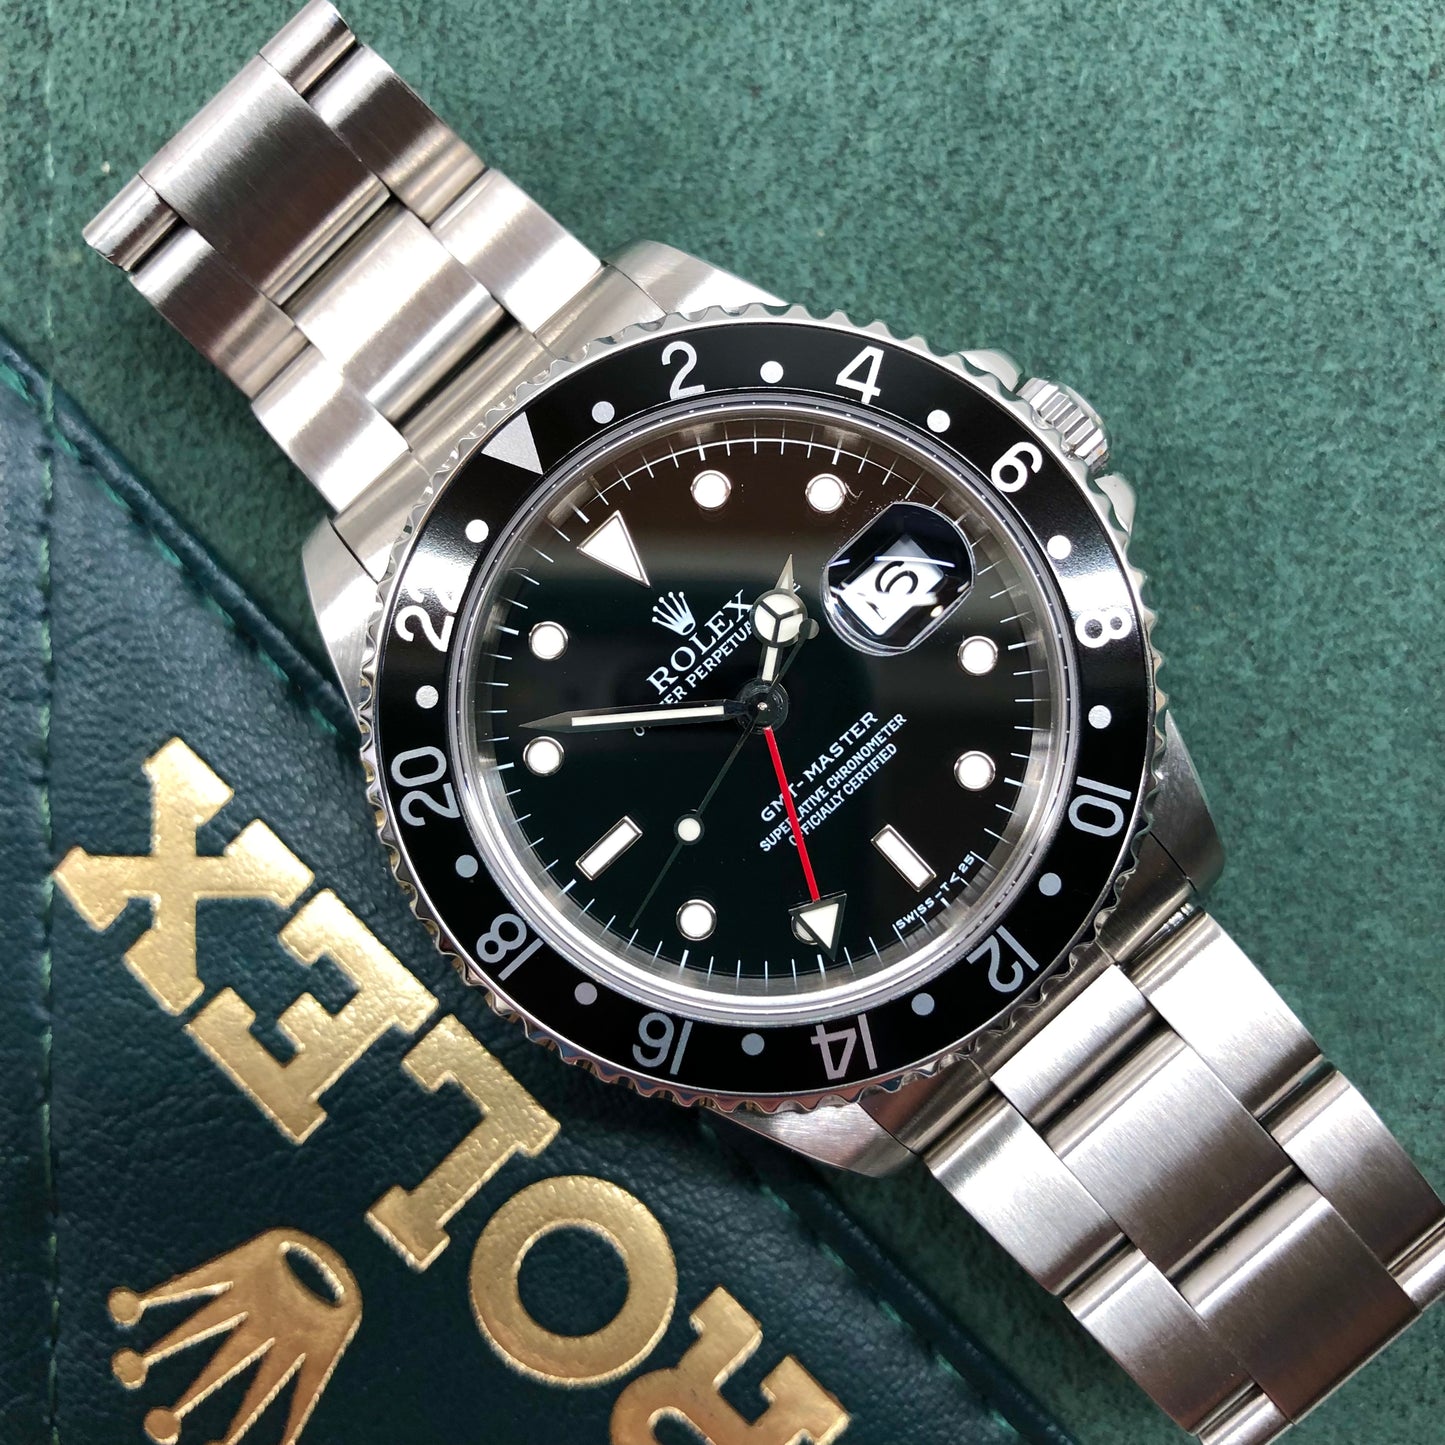 1995 Rolex GMT Master 16700 Stainless Steel Oyster Wristwatch - Hashtag Watch Co.